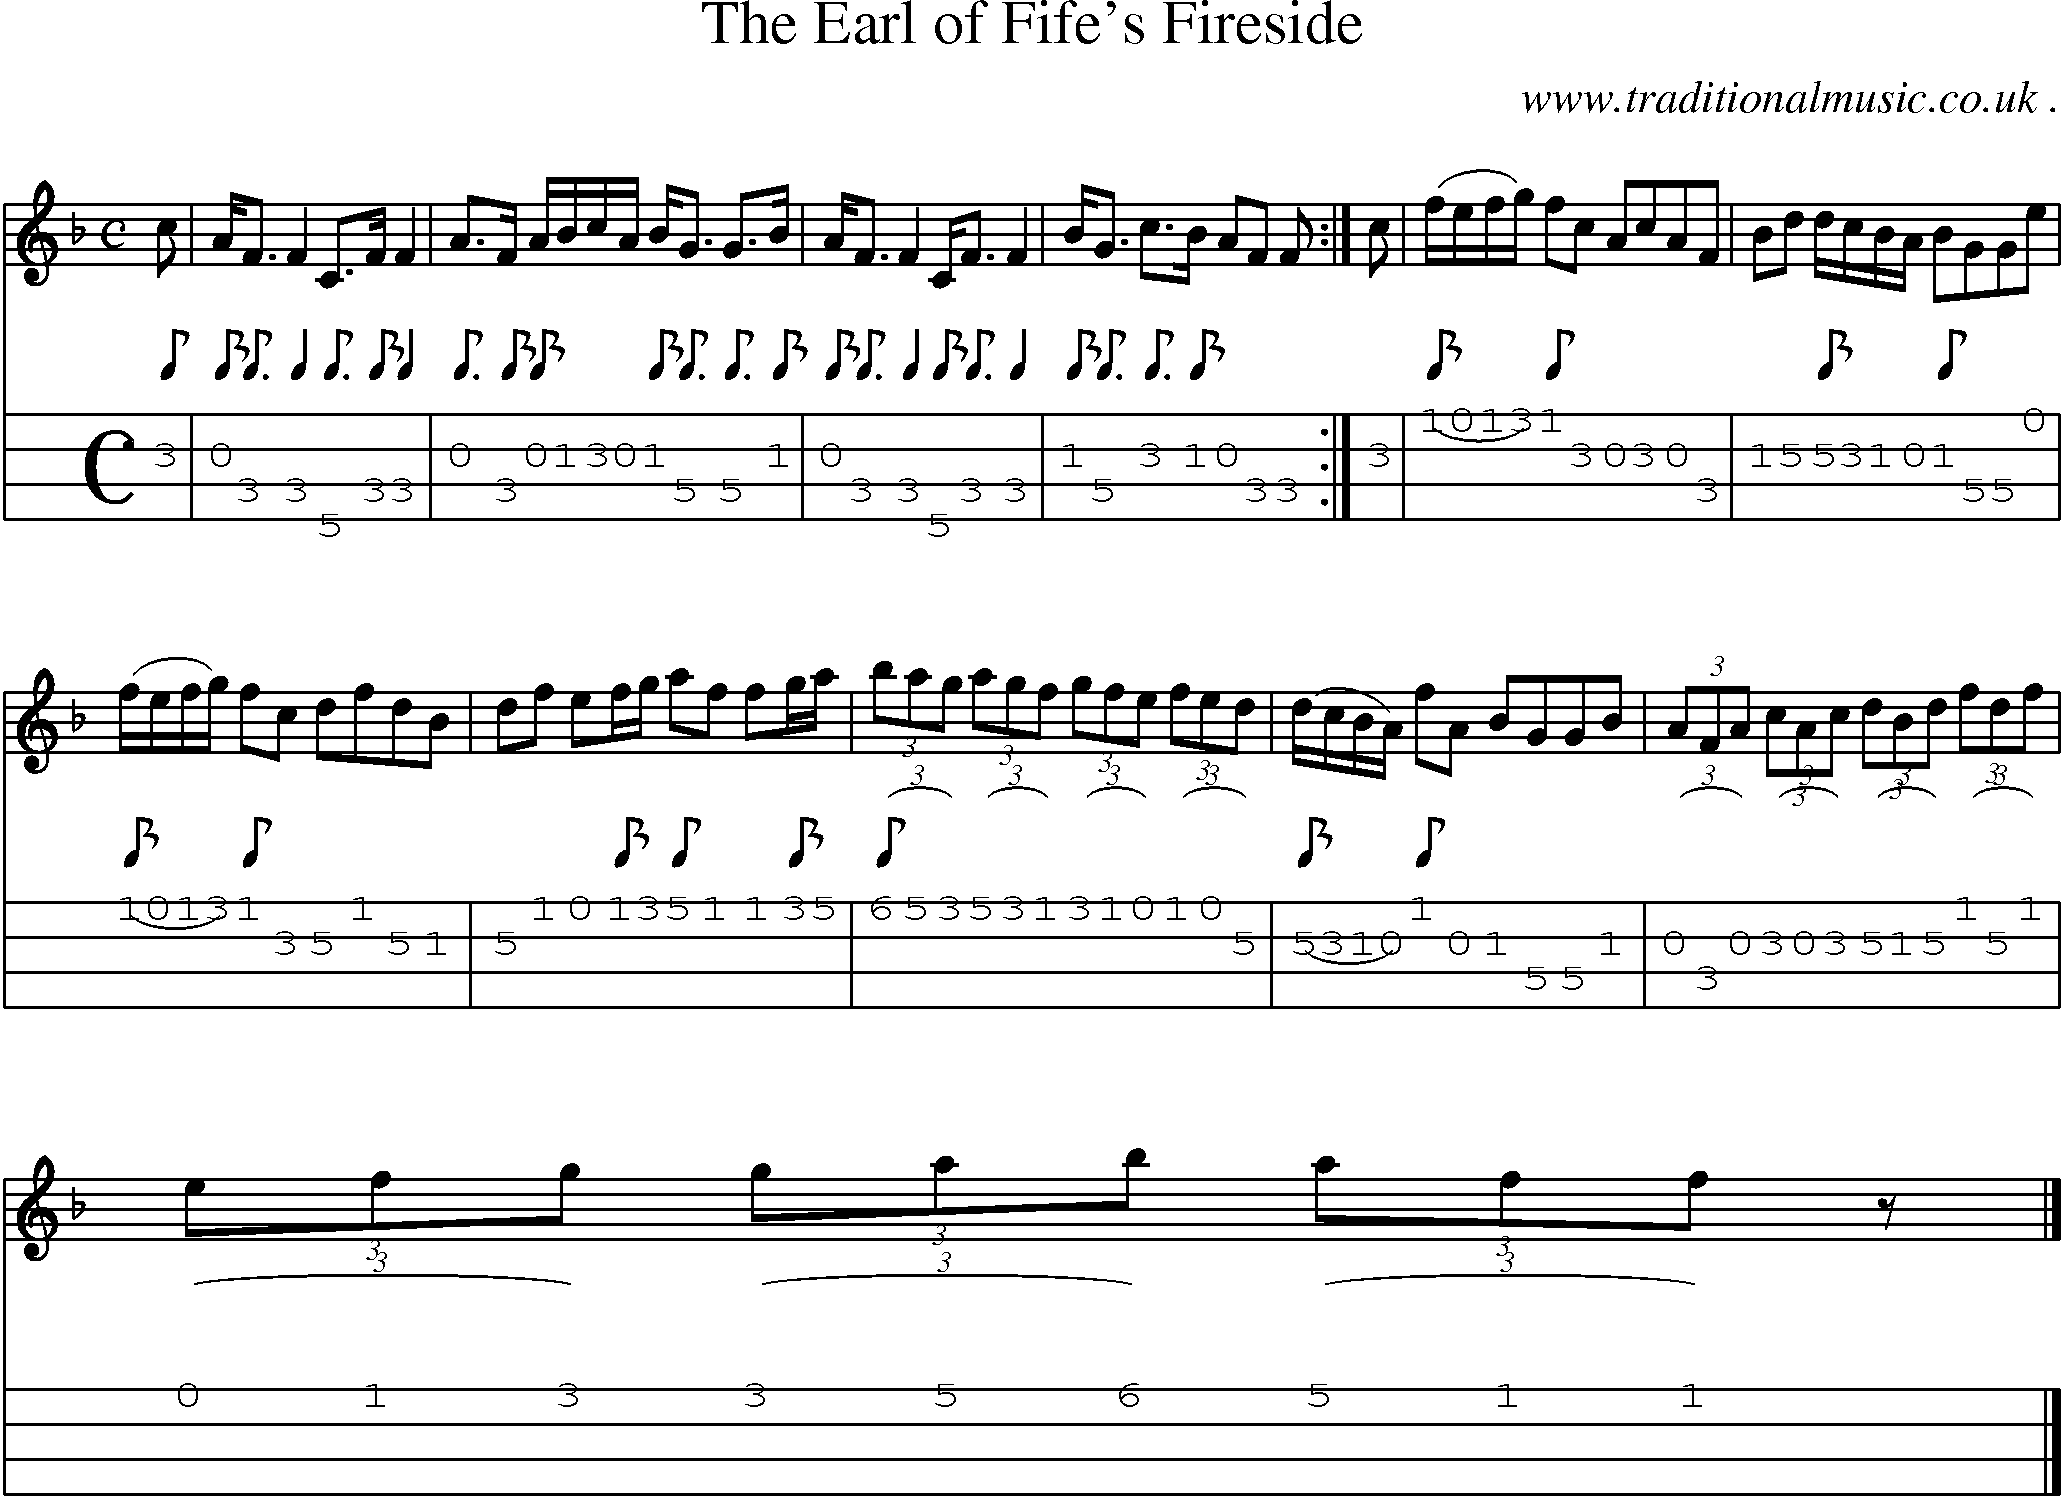 Sheet-music  score, Chords and Mandolin Tabs for The Earl Of Fifes Fireside